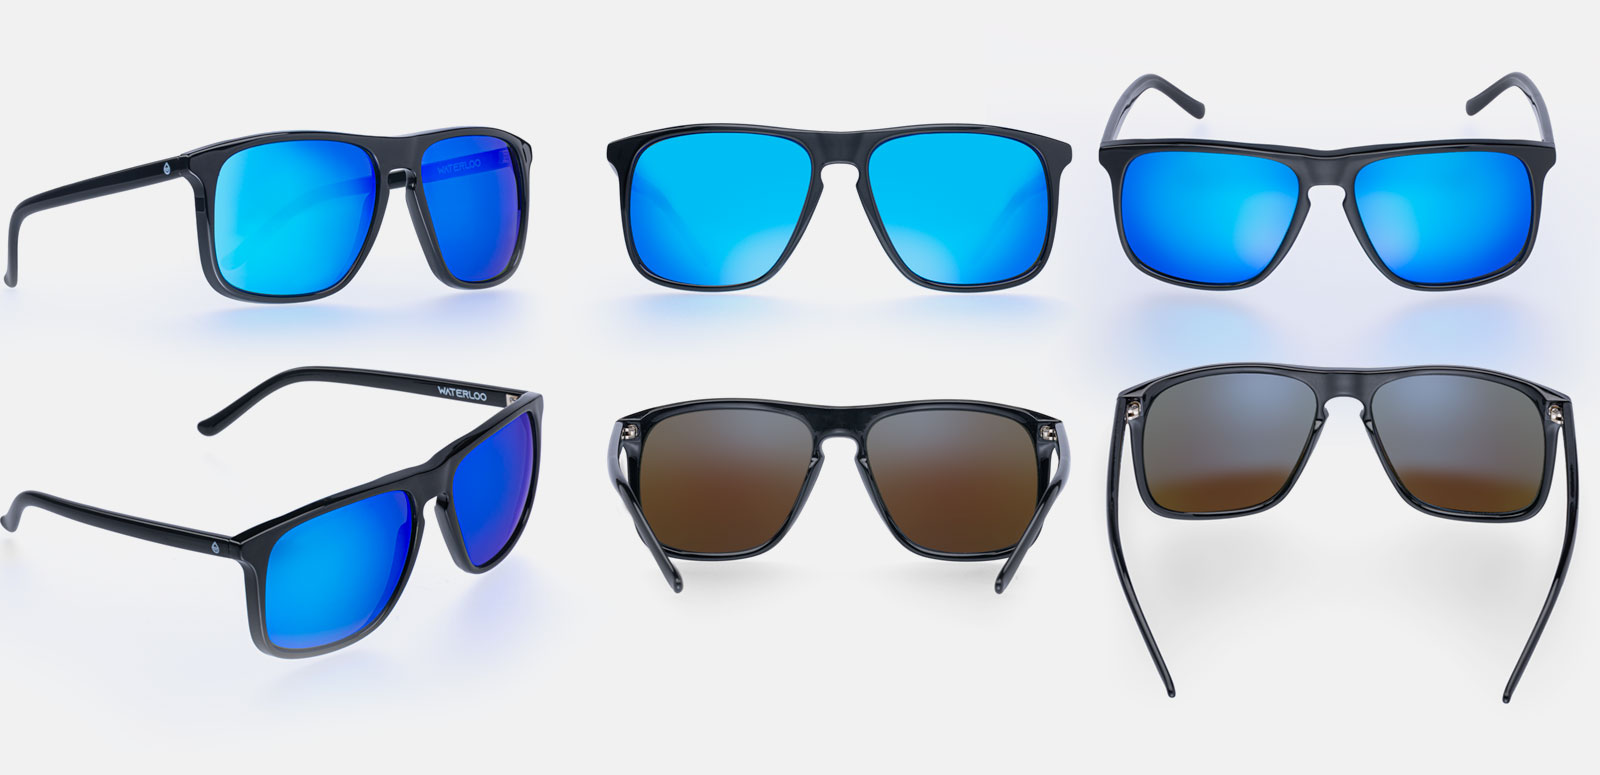 Sunglasses Product Photography